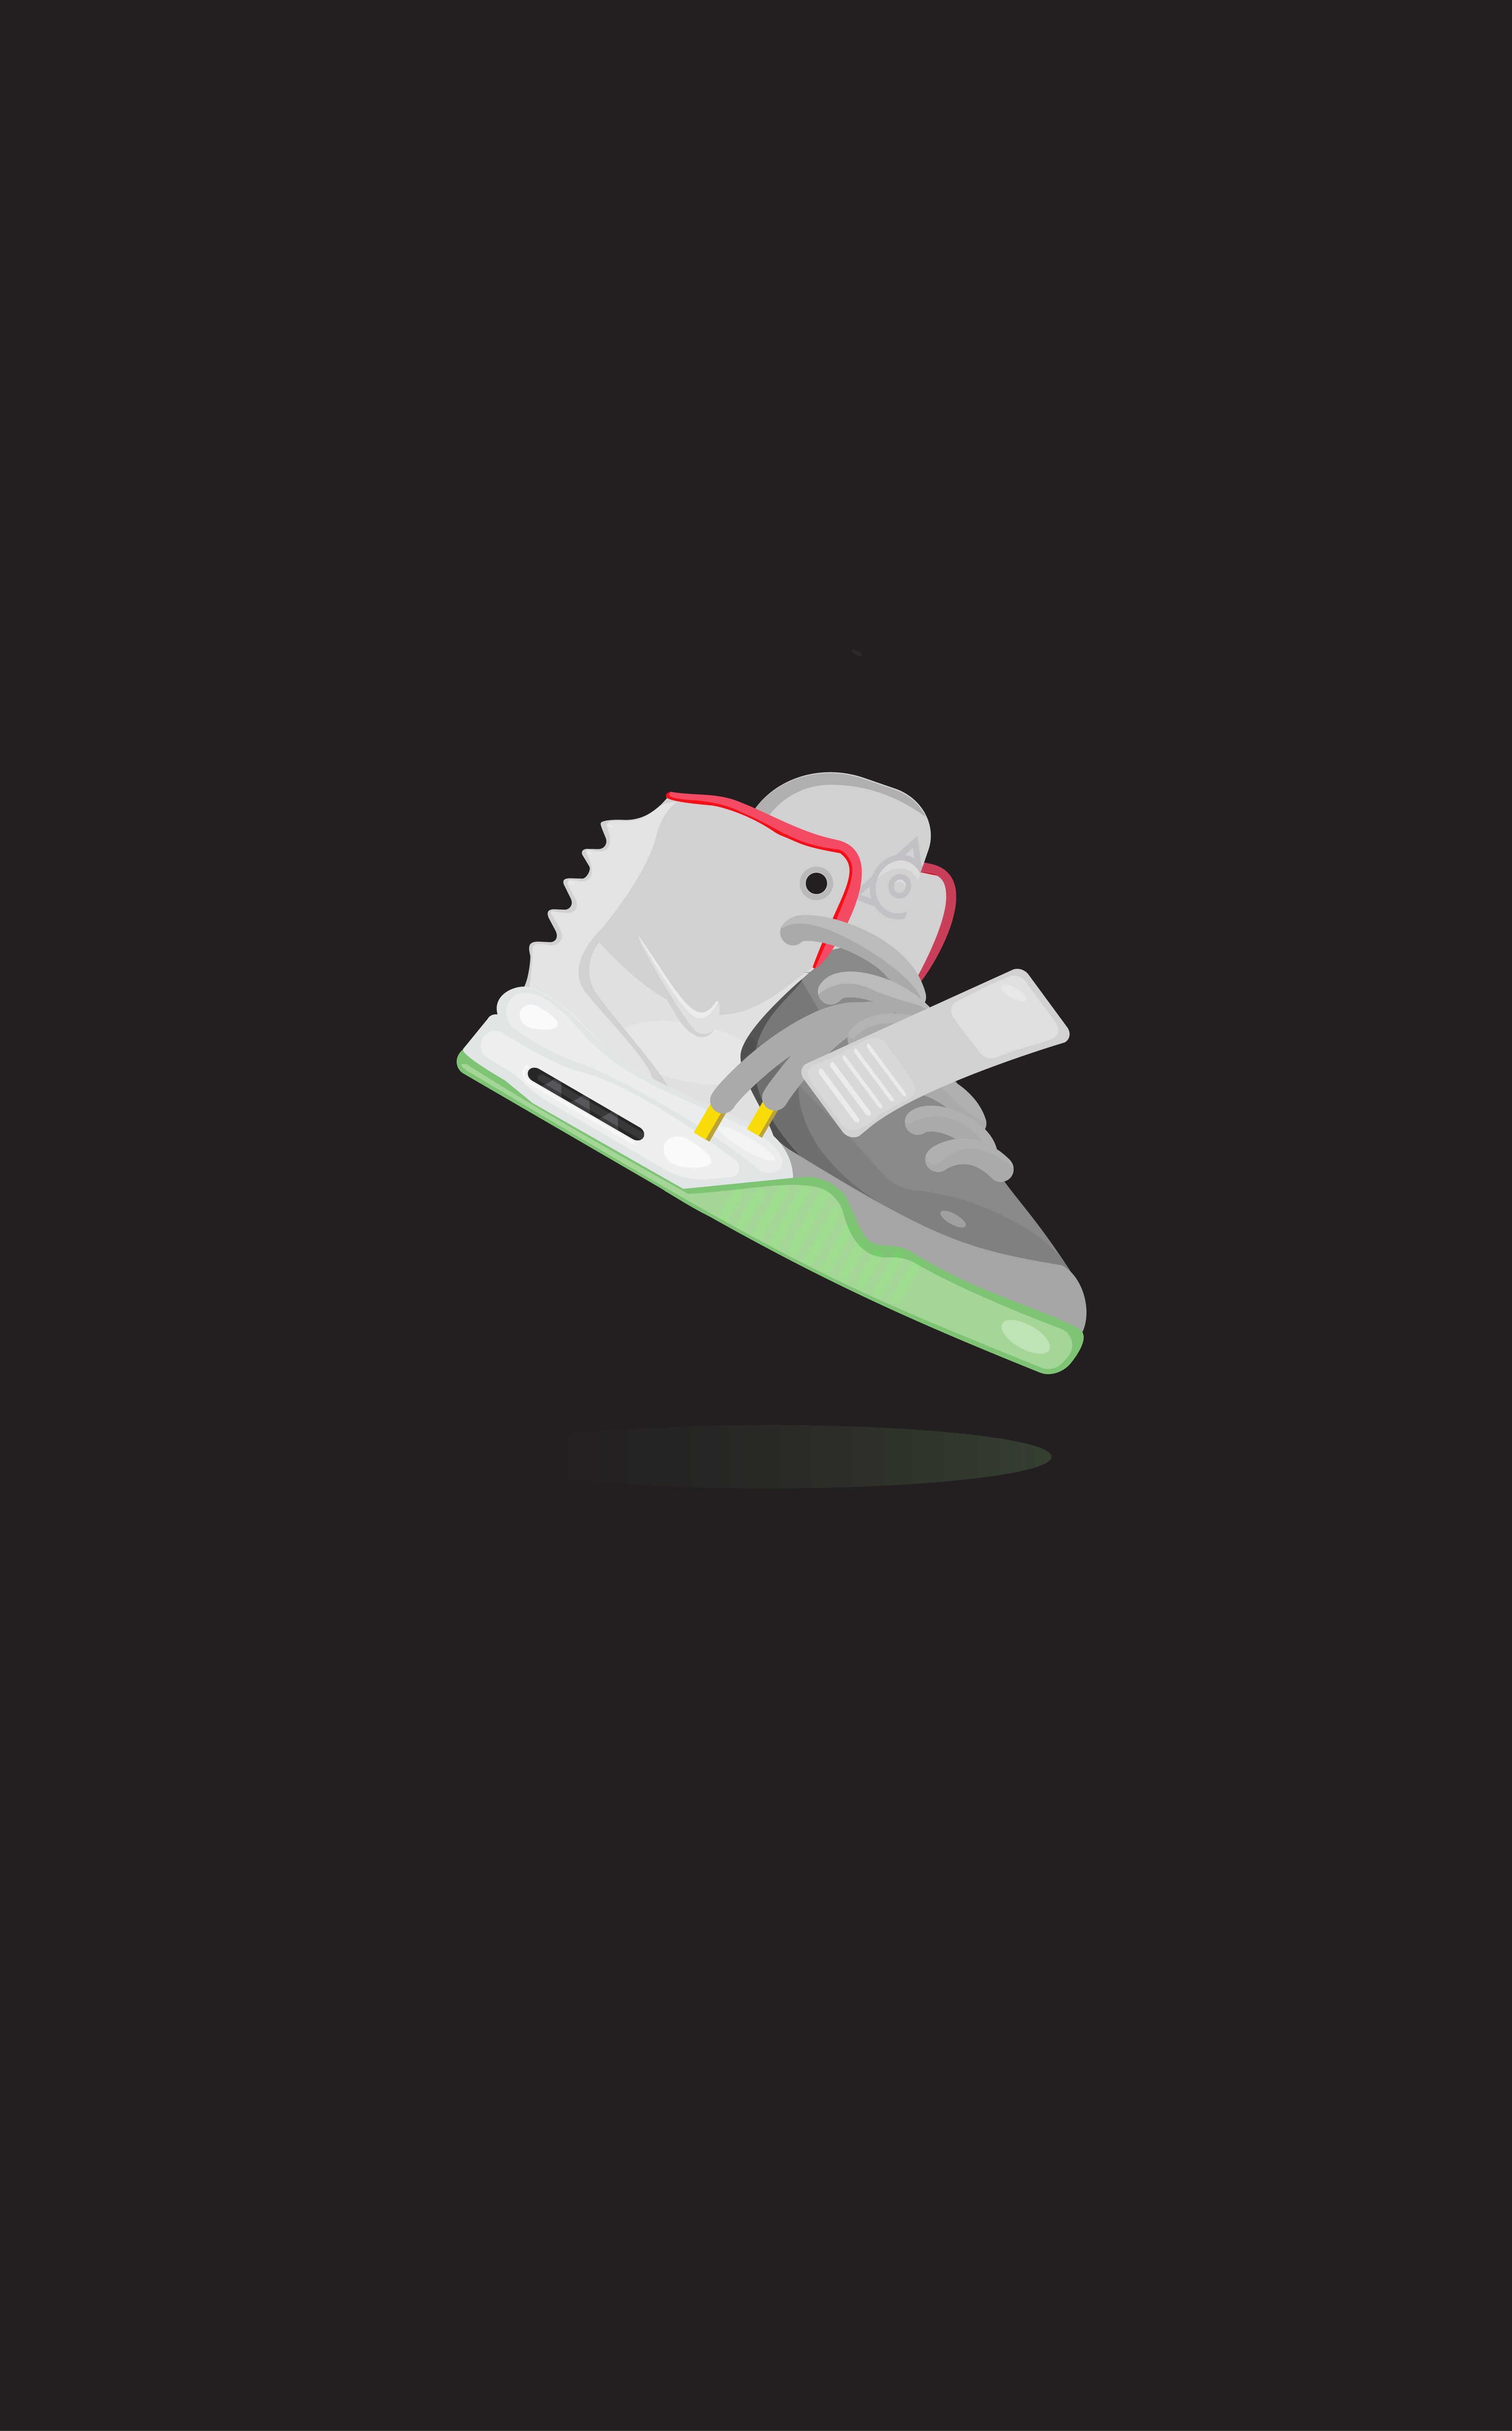 Yeezy Photos Download The BEST Free Yeezy Stock Photos  HD Images